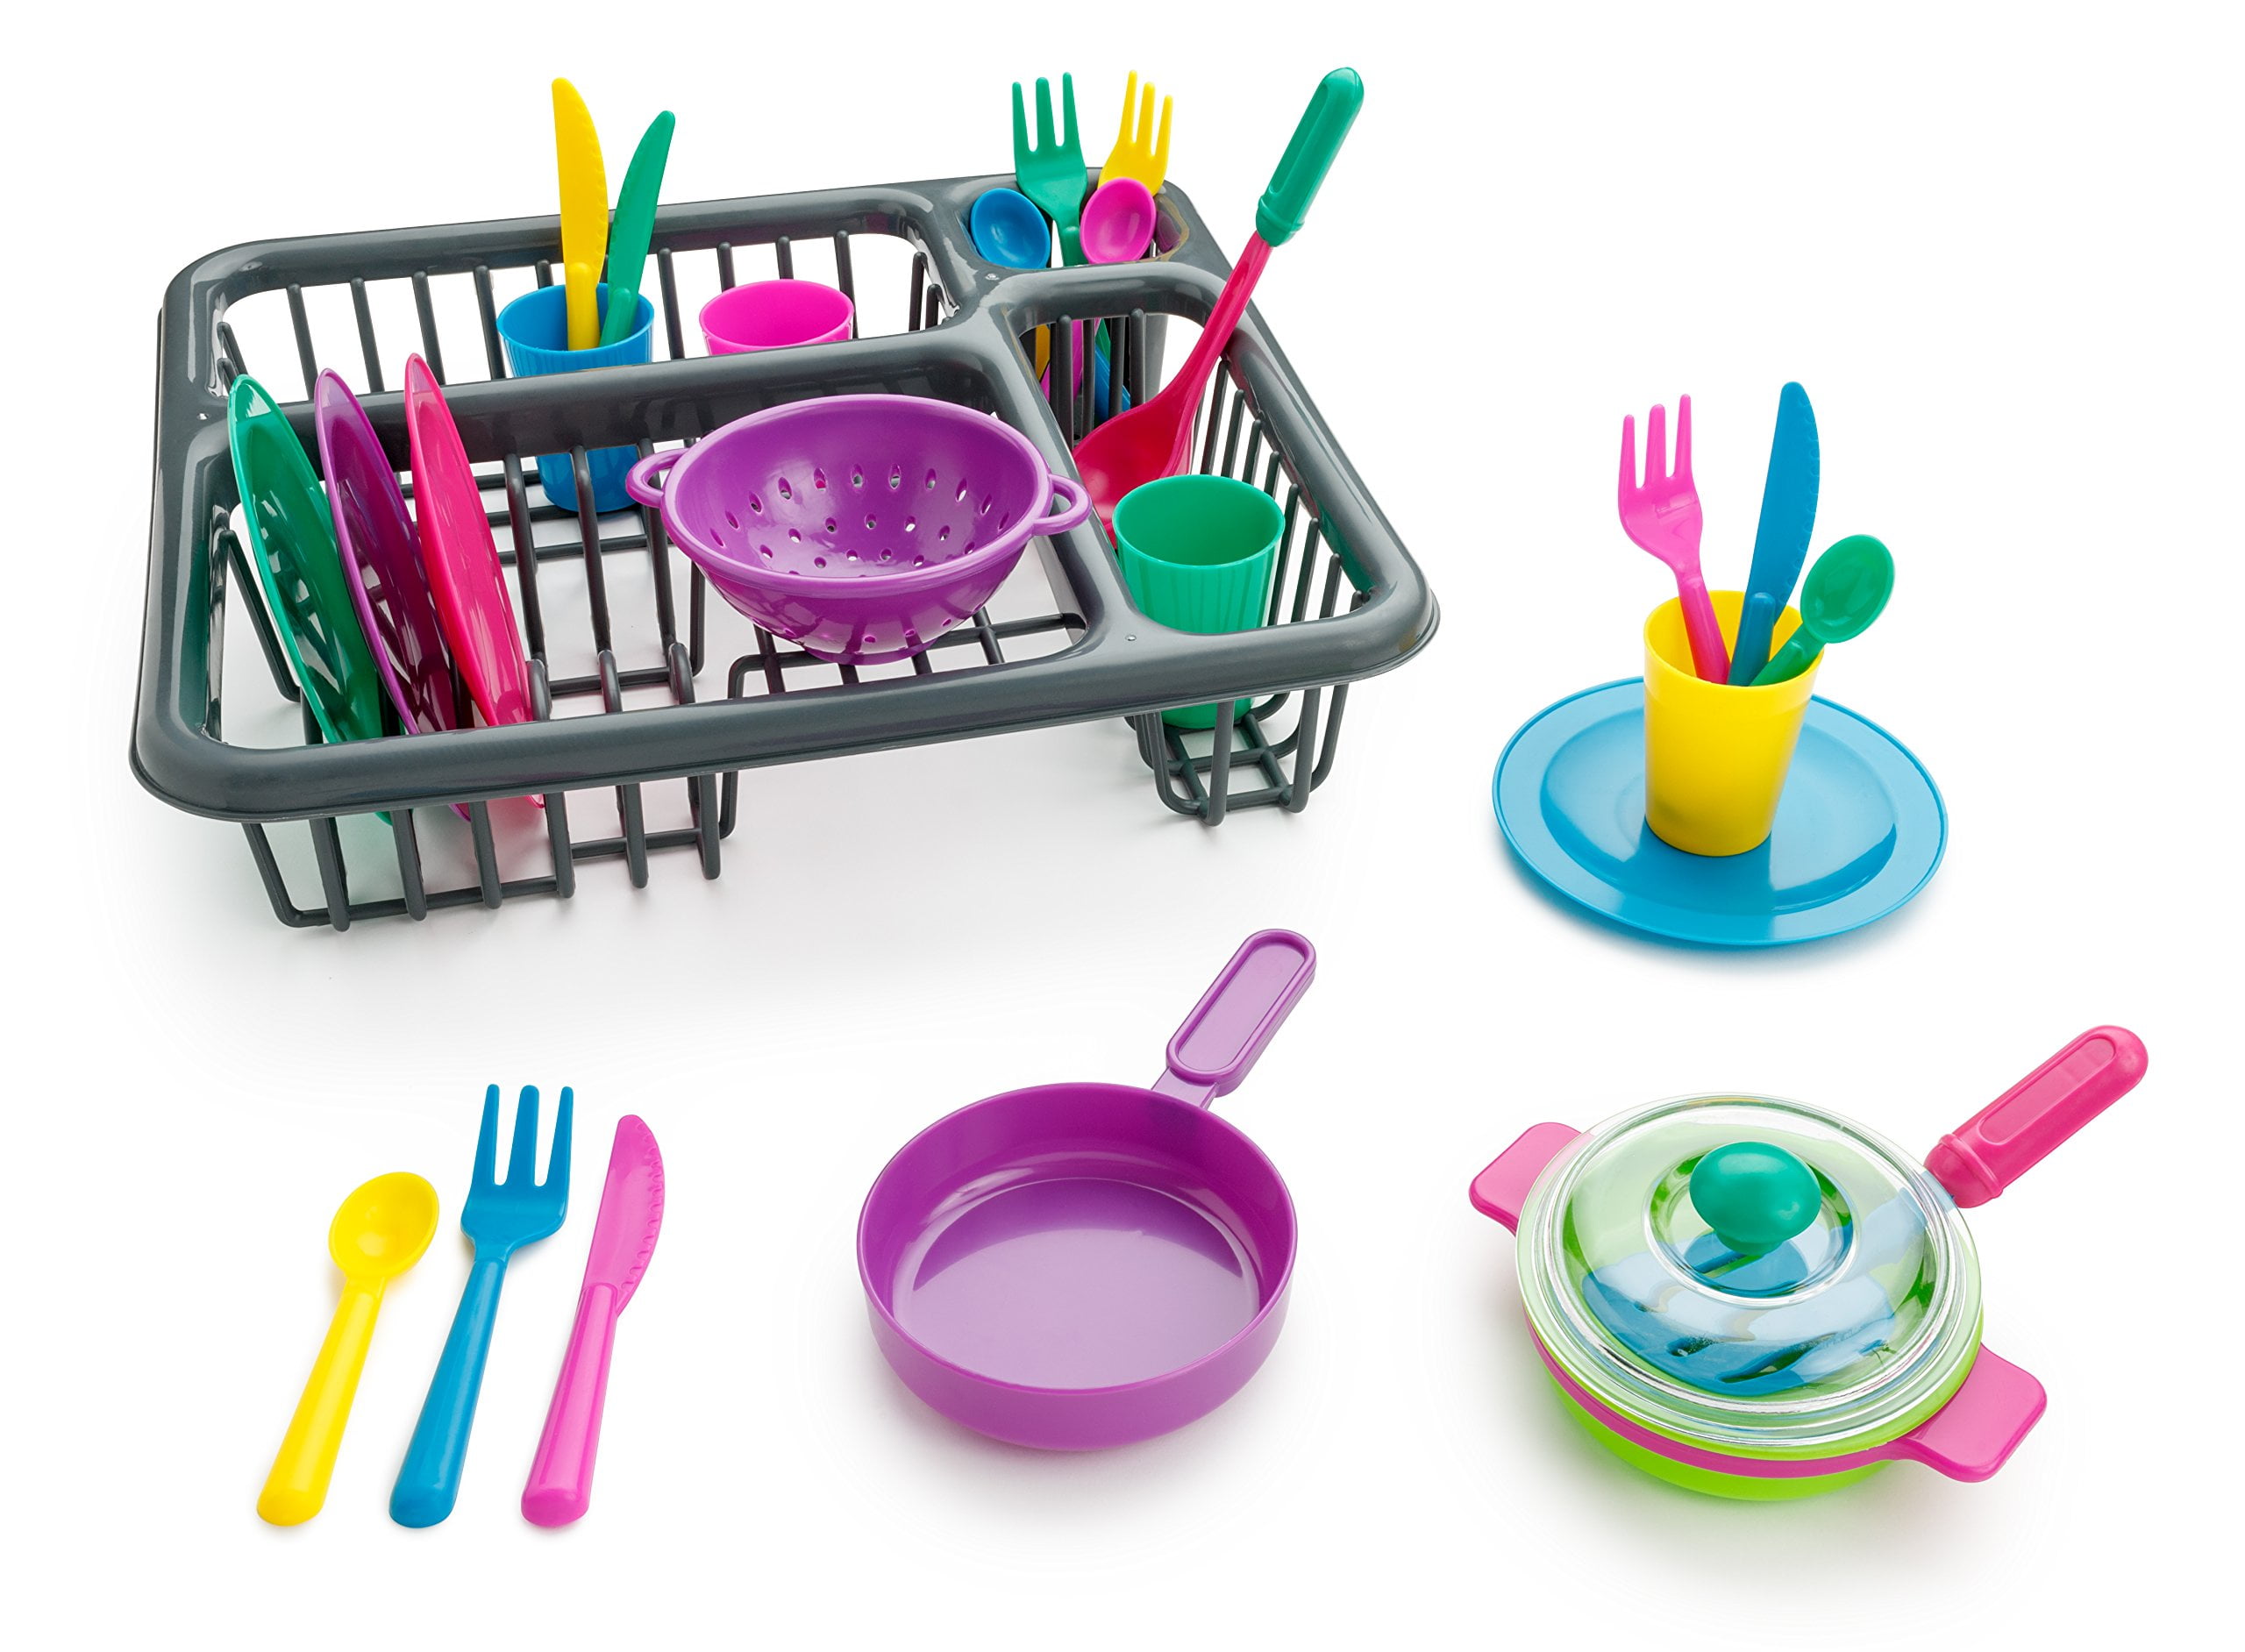 Details about   Childrens Durable Kitchen Toys Tableware Dishes Play Set with Drain Basket 